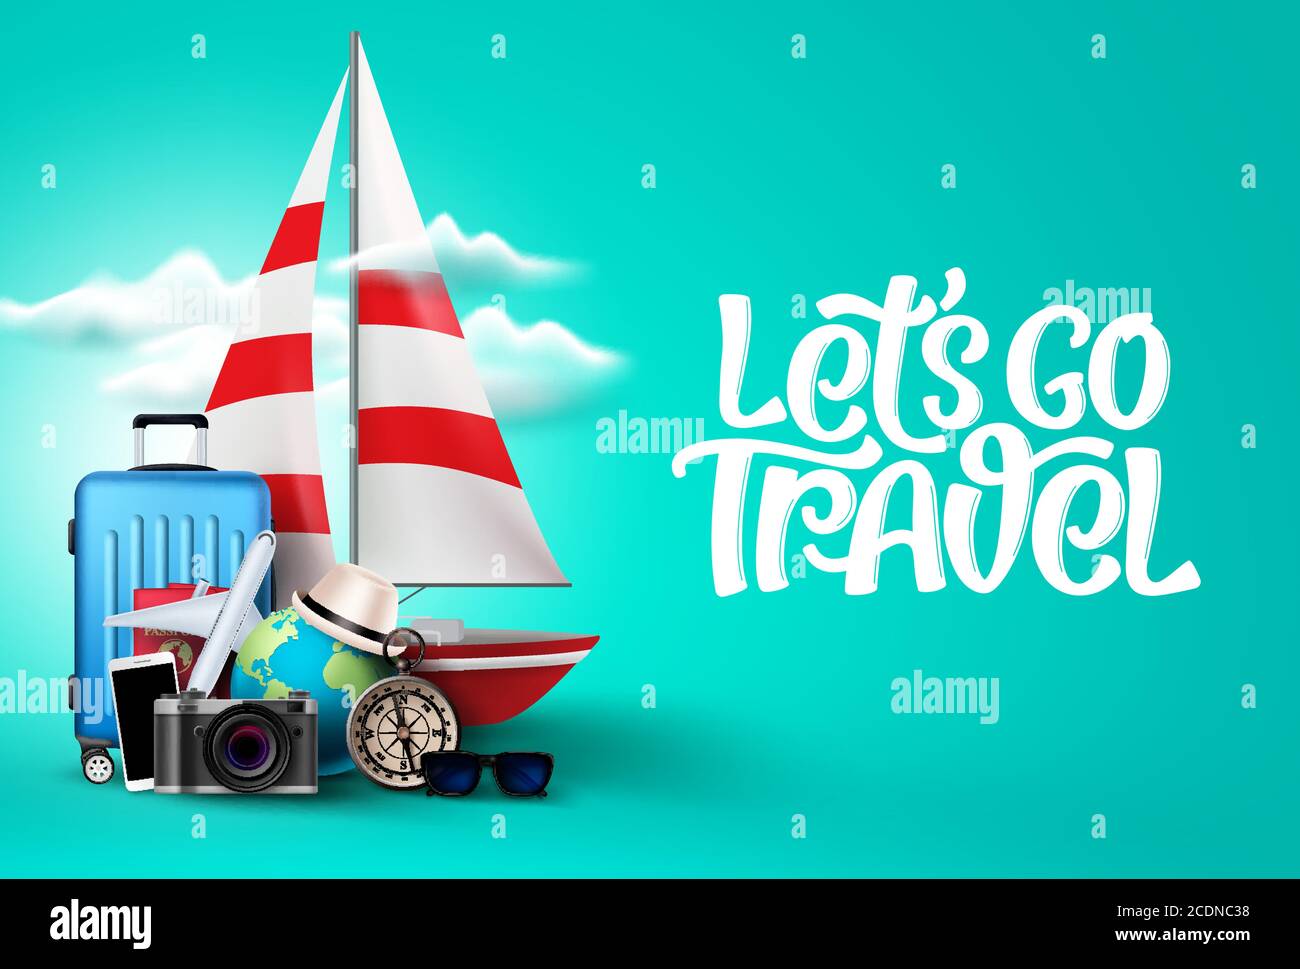 Let's go travel vector background template. Let's go travel text in empty space with travel vacation and tour trip elements like cruise ship, luggage Stock Vector